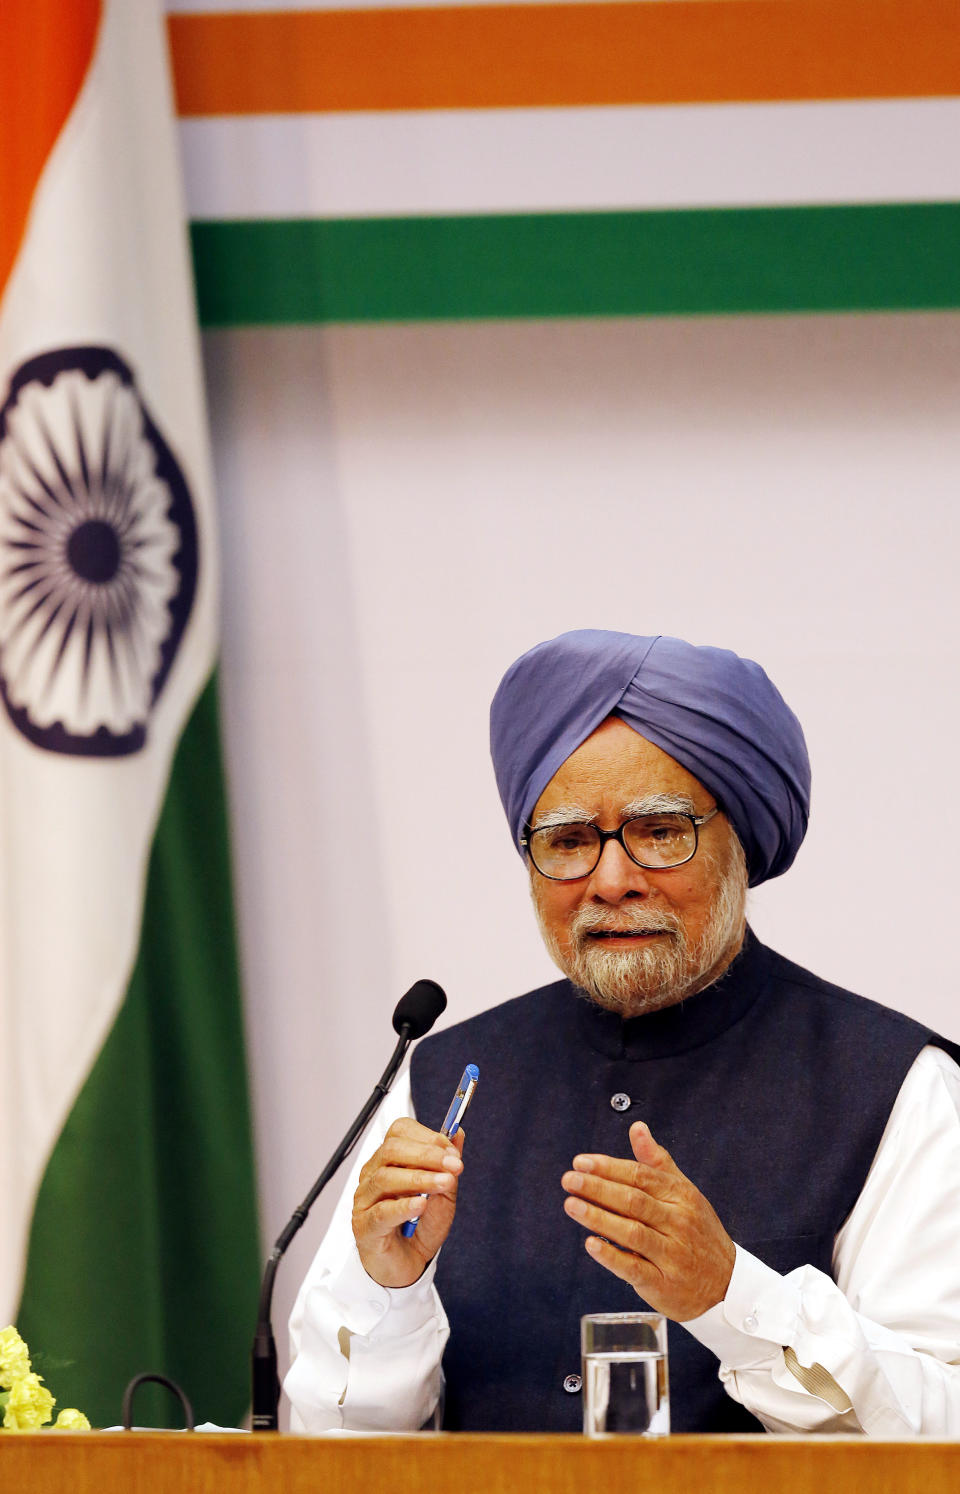 Indian Prime Minster Manmohan Singh addresses a press conference, in New Delhi, India, Friday, Jan. 3, 2014. Prime Minister Singh said Friday he would step aside after 10 years in office, paving the way for Rahul Gandhi to take the reins of the world's biggest democracy if his party stays in power in this year's elections. (AP Photo/Harish Tyagi, Pool)